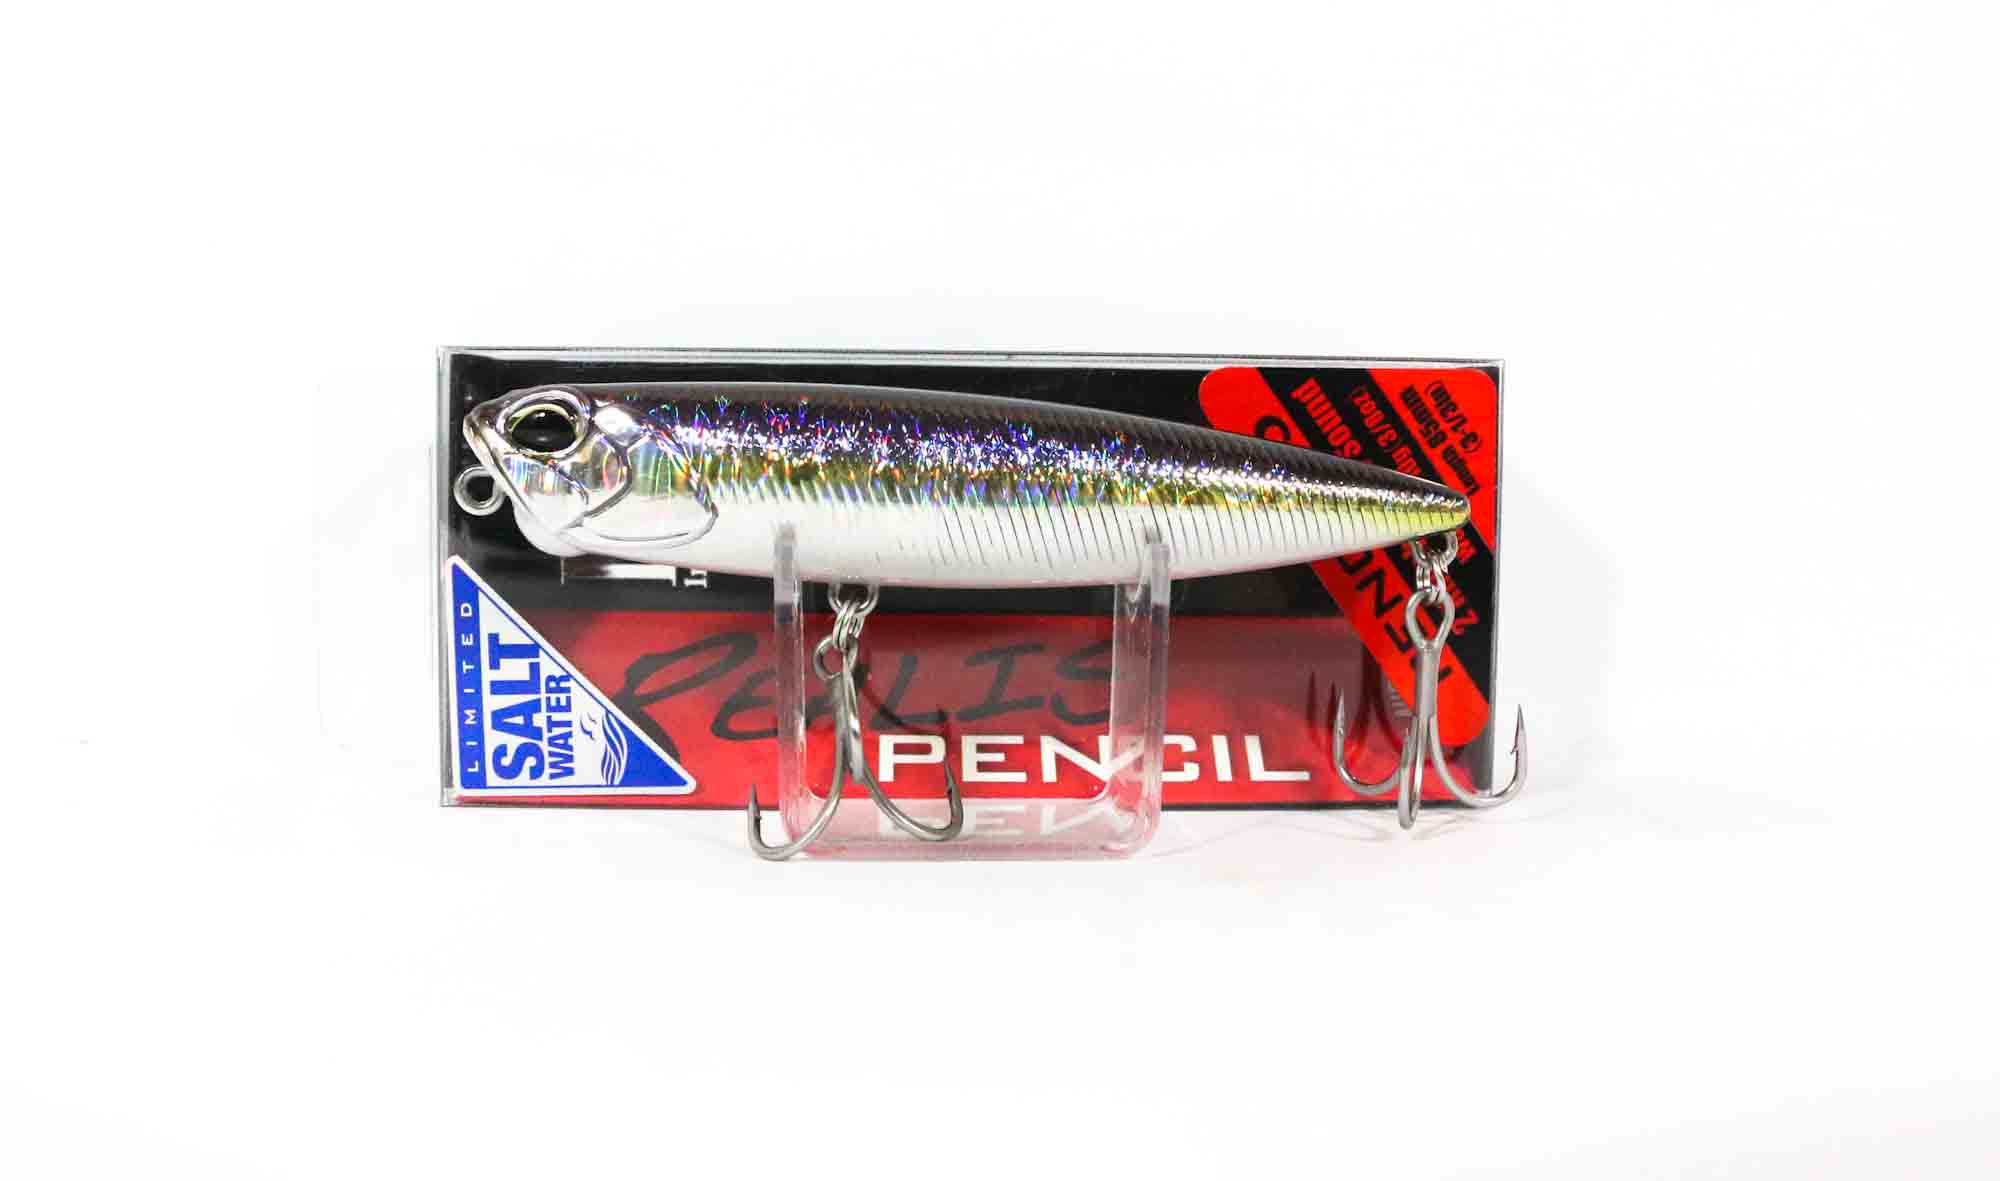 Duo Realis Pencil 85 SW Topwater Floating Lure DHA0140 0924 